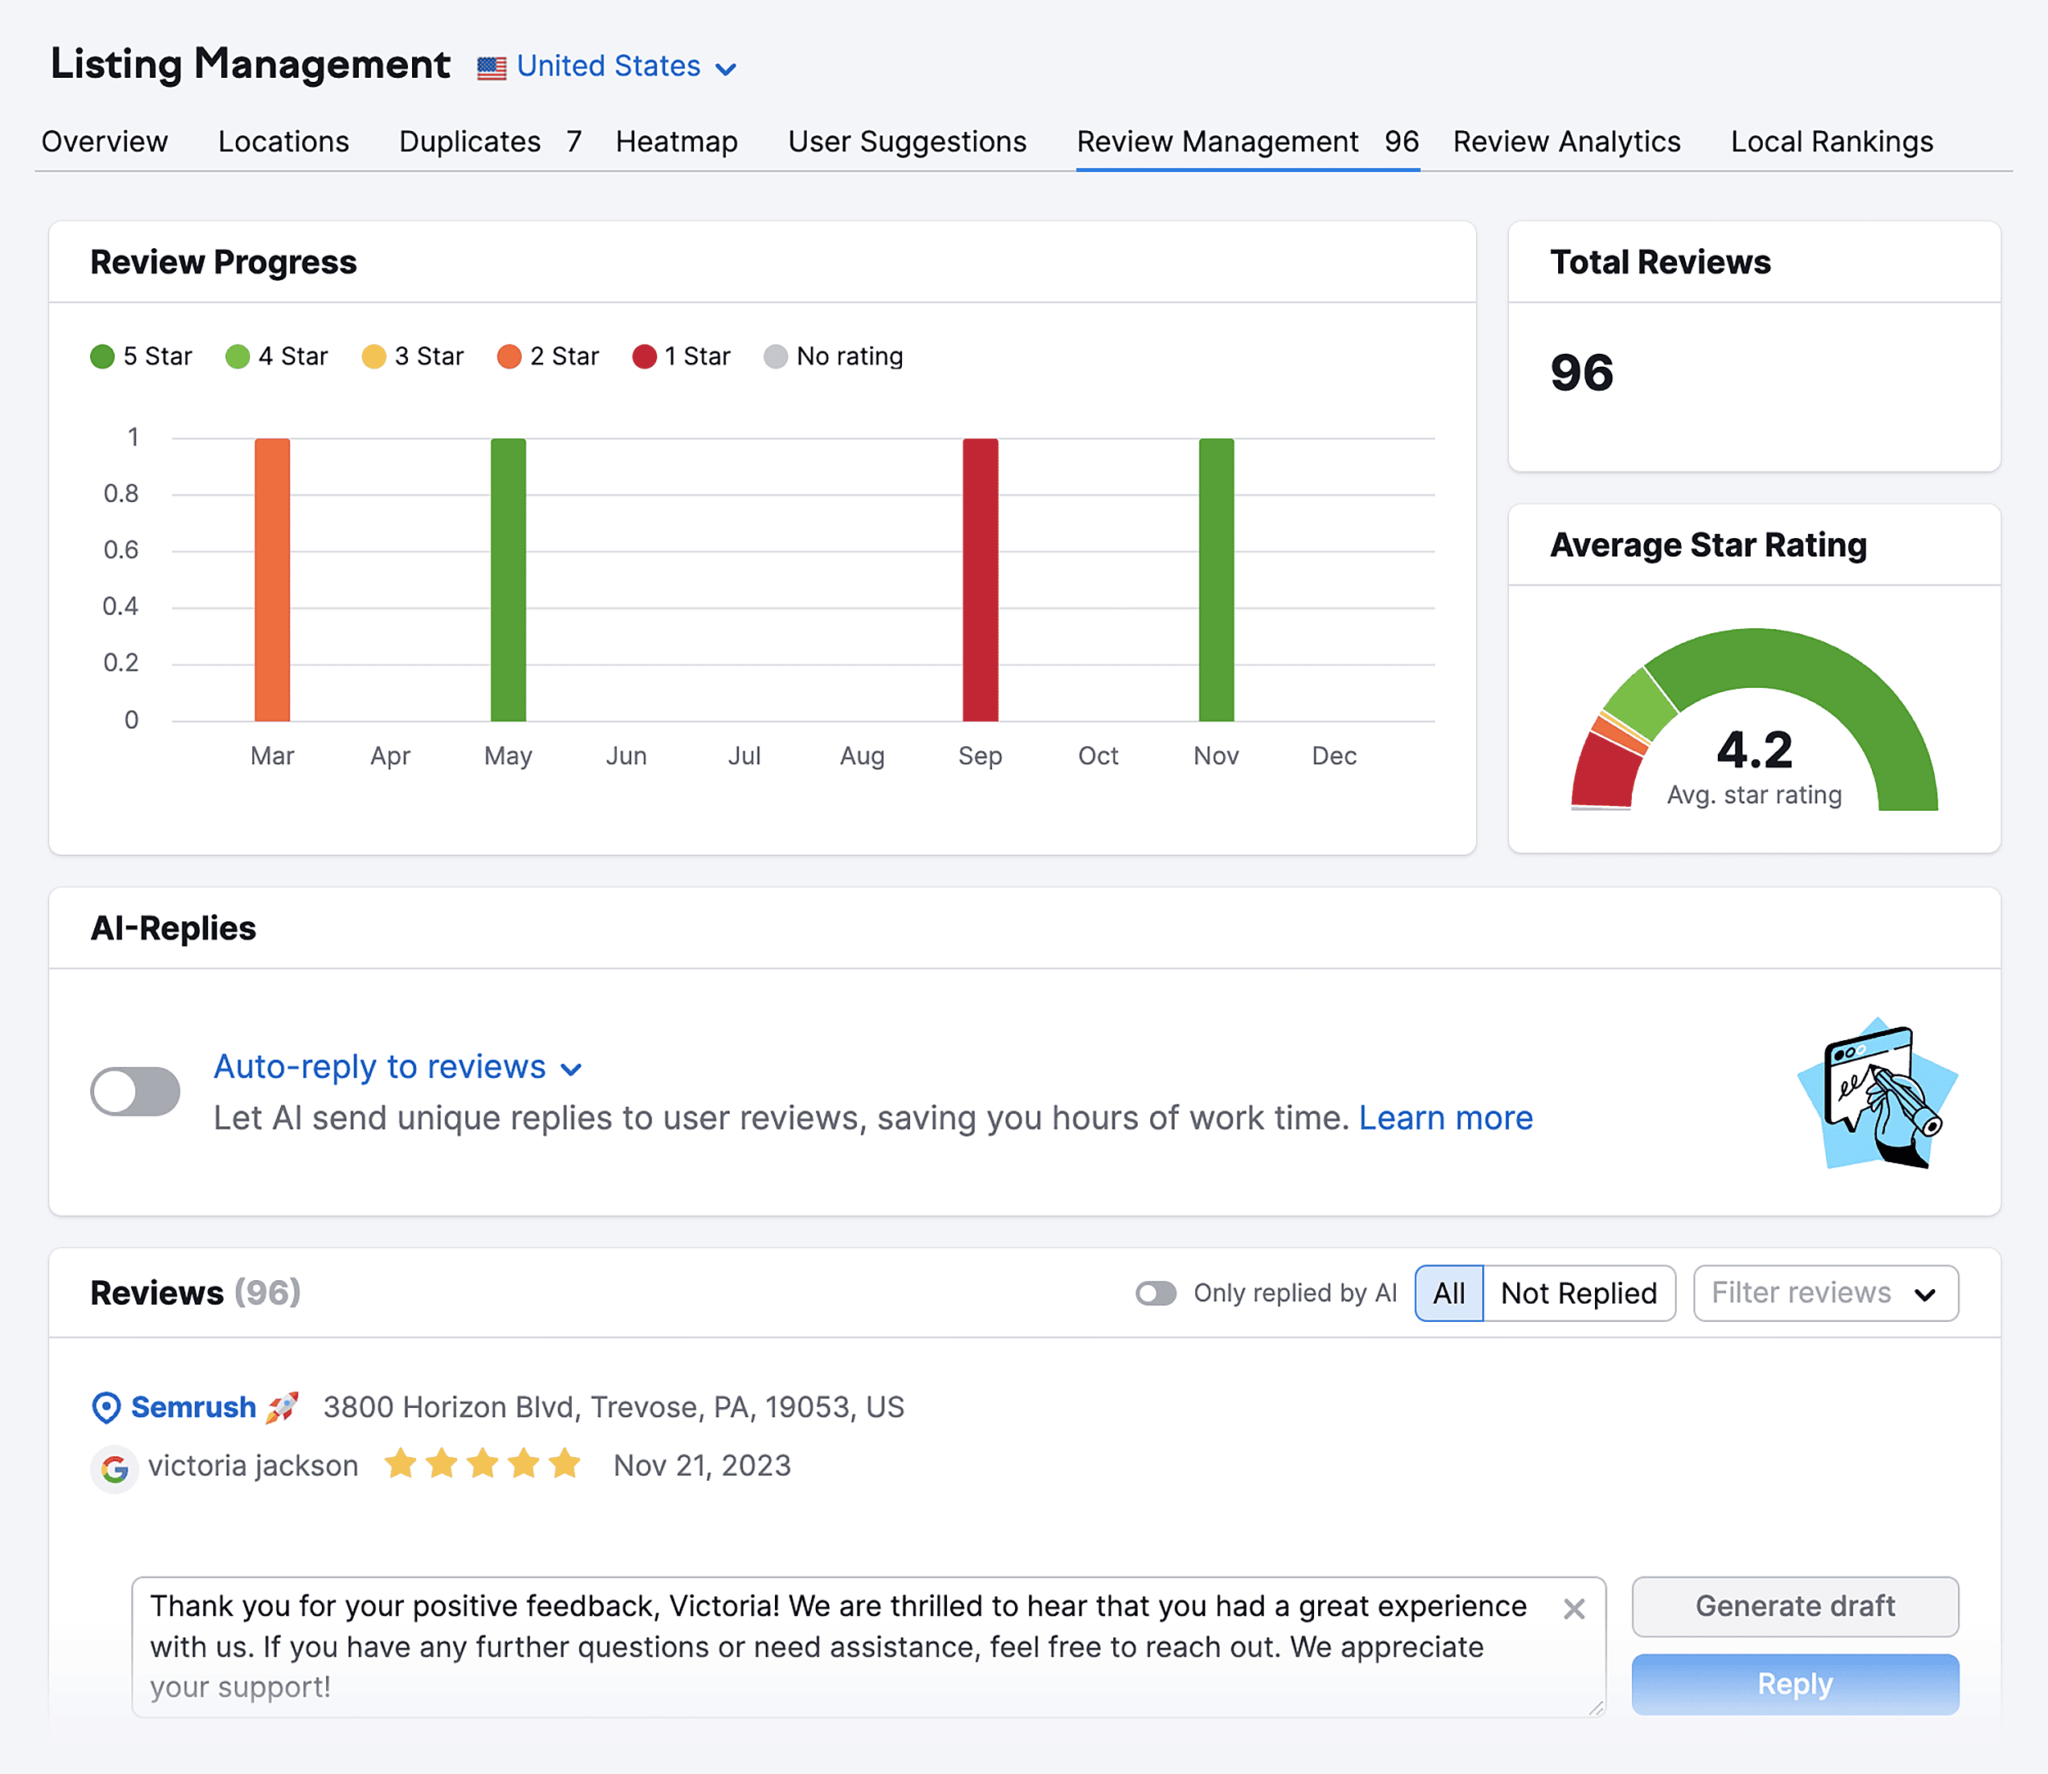 semrush-review-management-2 Small Business Marketing: 6 Proven Strategies for More Reach